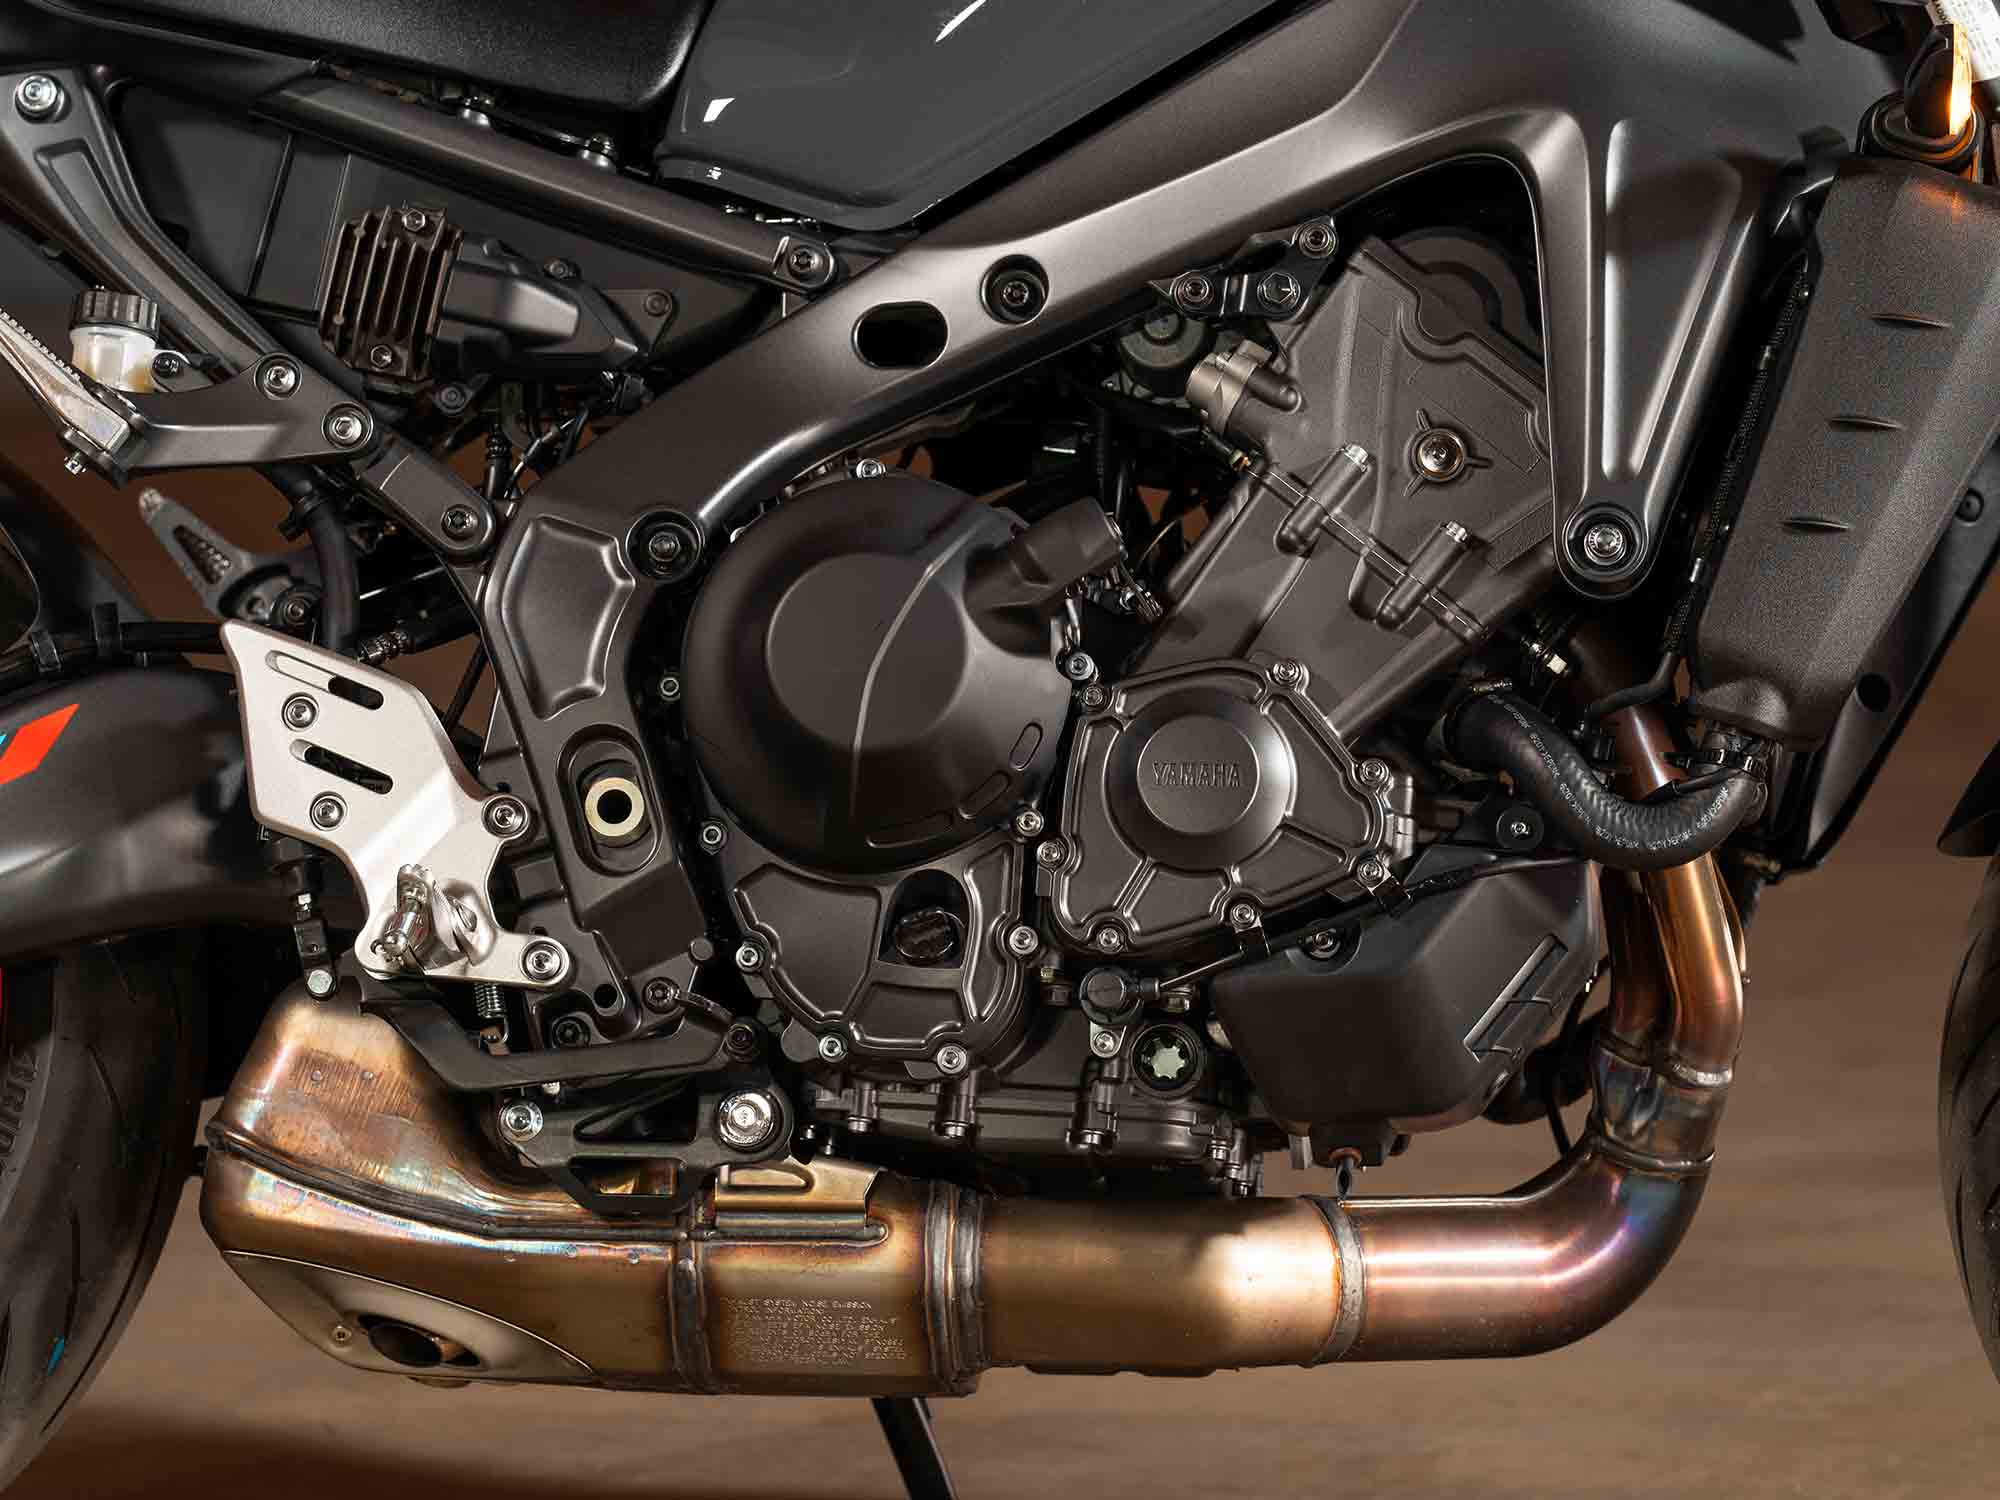 2021 Yamaha MT-09 review - popular naked gets full makeover